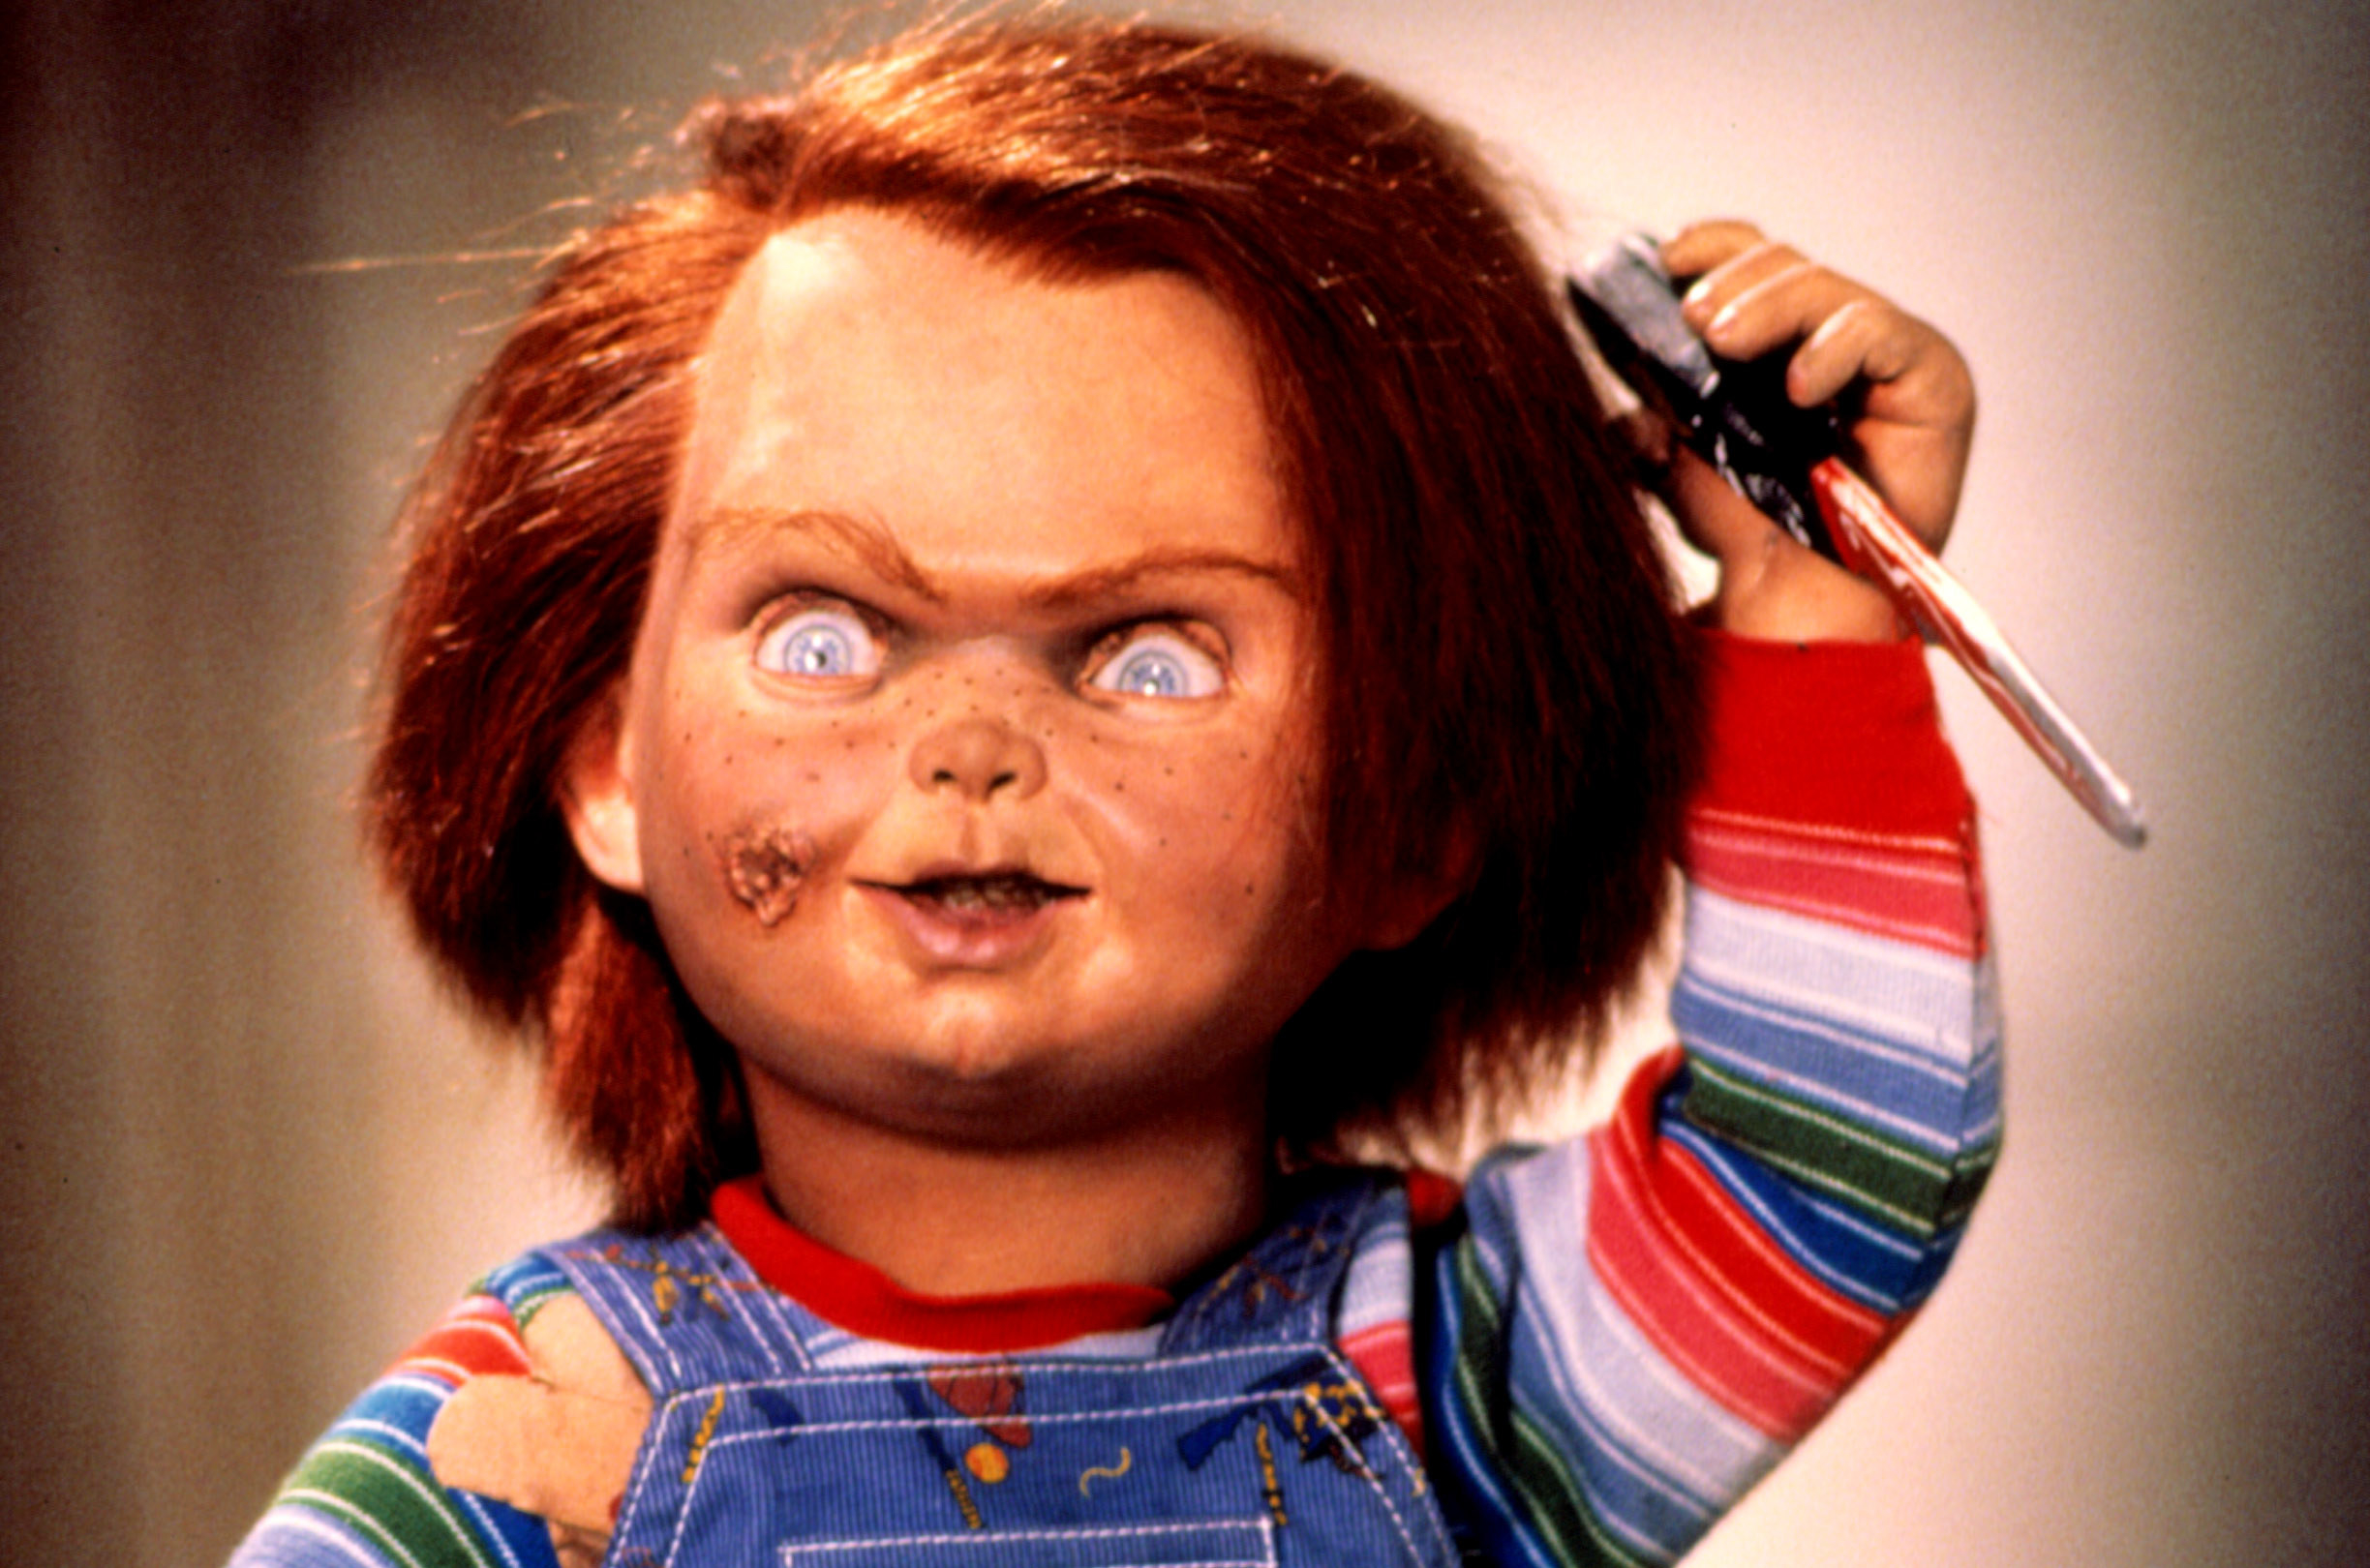 Chucky in his full, terrifying form